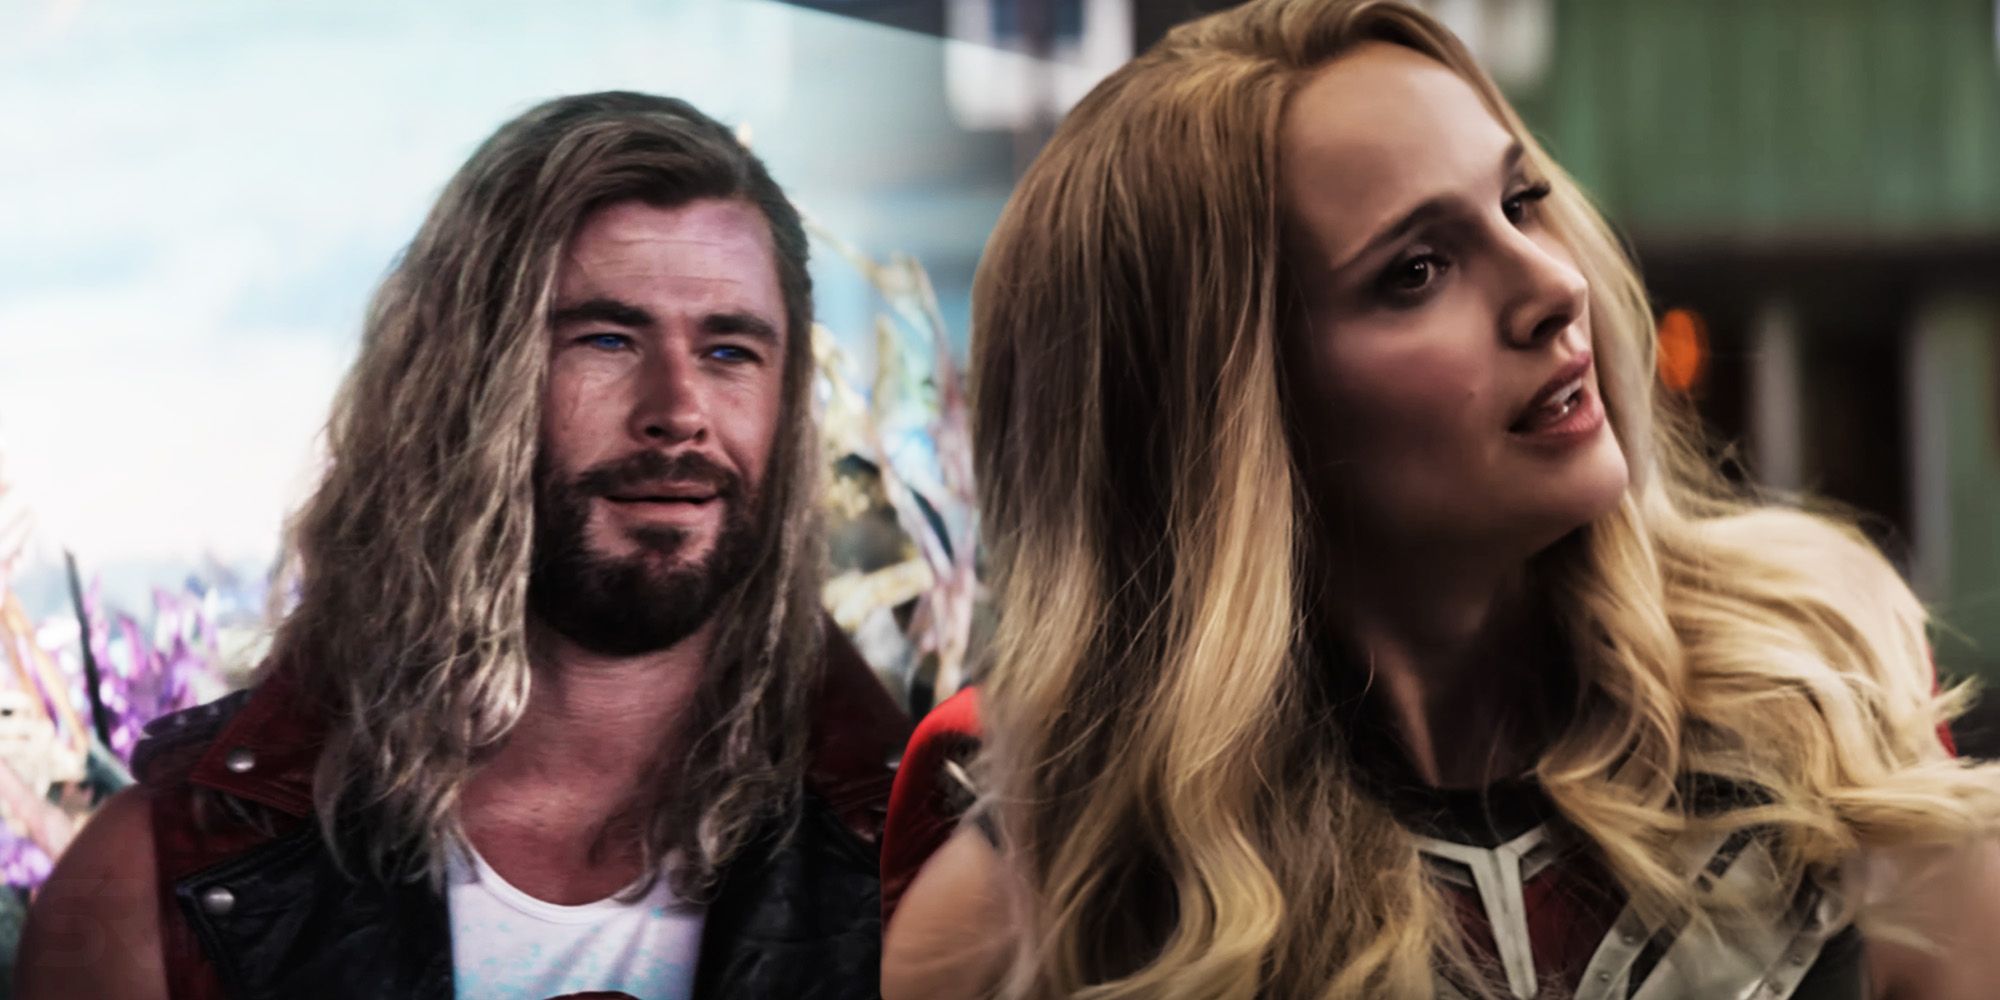 Thor And Jane’s Break-Up Confusion Is Way More Tragic Than You Realize